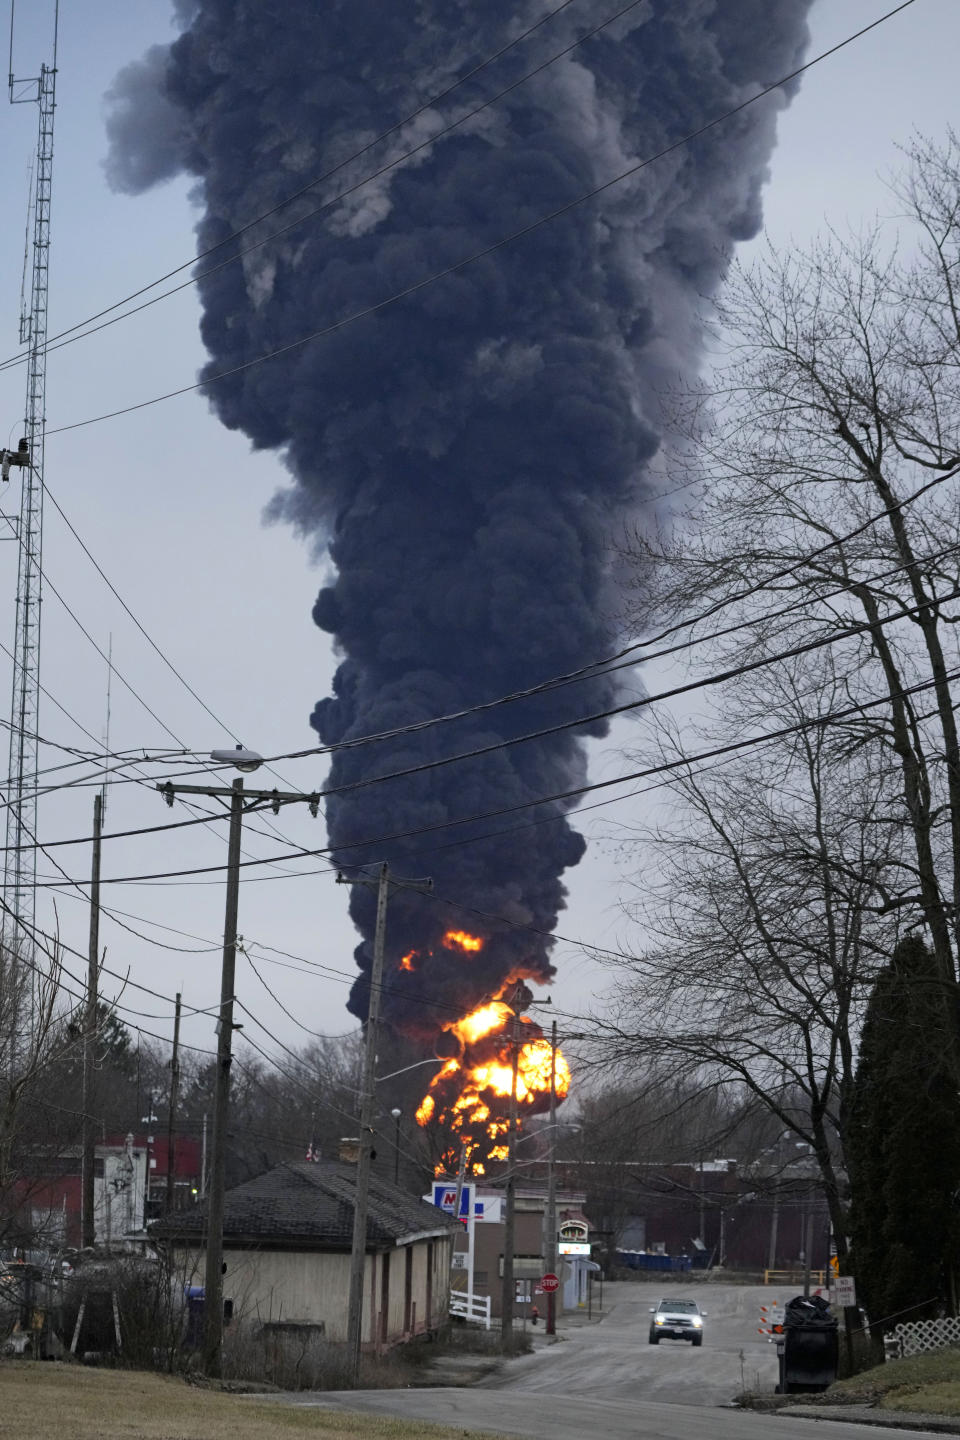 A black plume rises over East Palestine, Ohio, as a result of a controlled detonation of a portion of the derailed Norfolk Southern trains Monday, Feb. 6, 2023. (AP Photo/Gene J. Puskar)